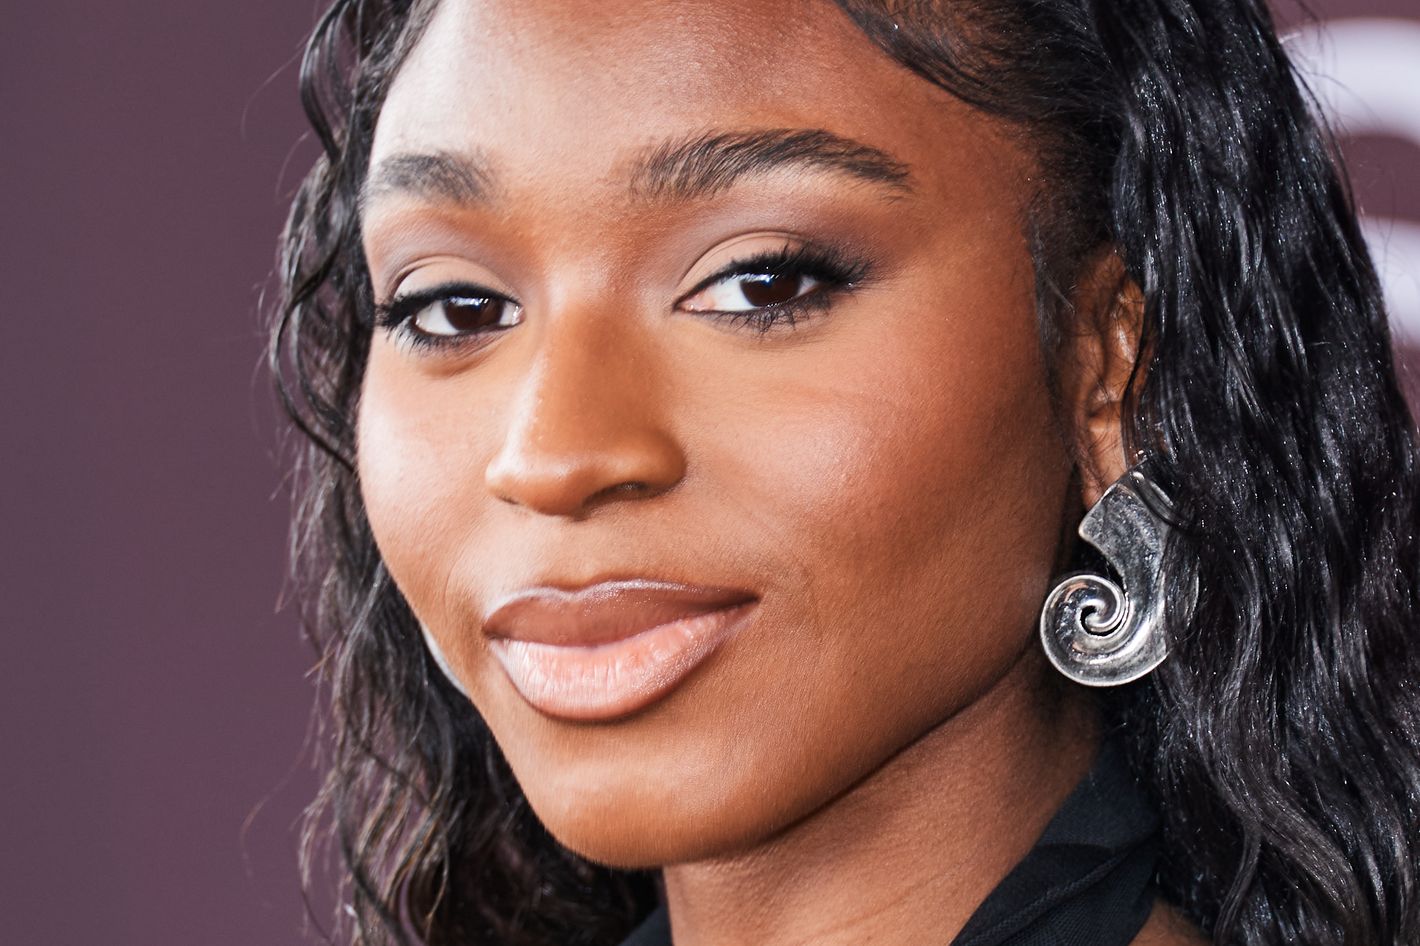 No, You Didn’t Hallucinate a New Normani Song